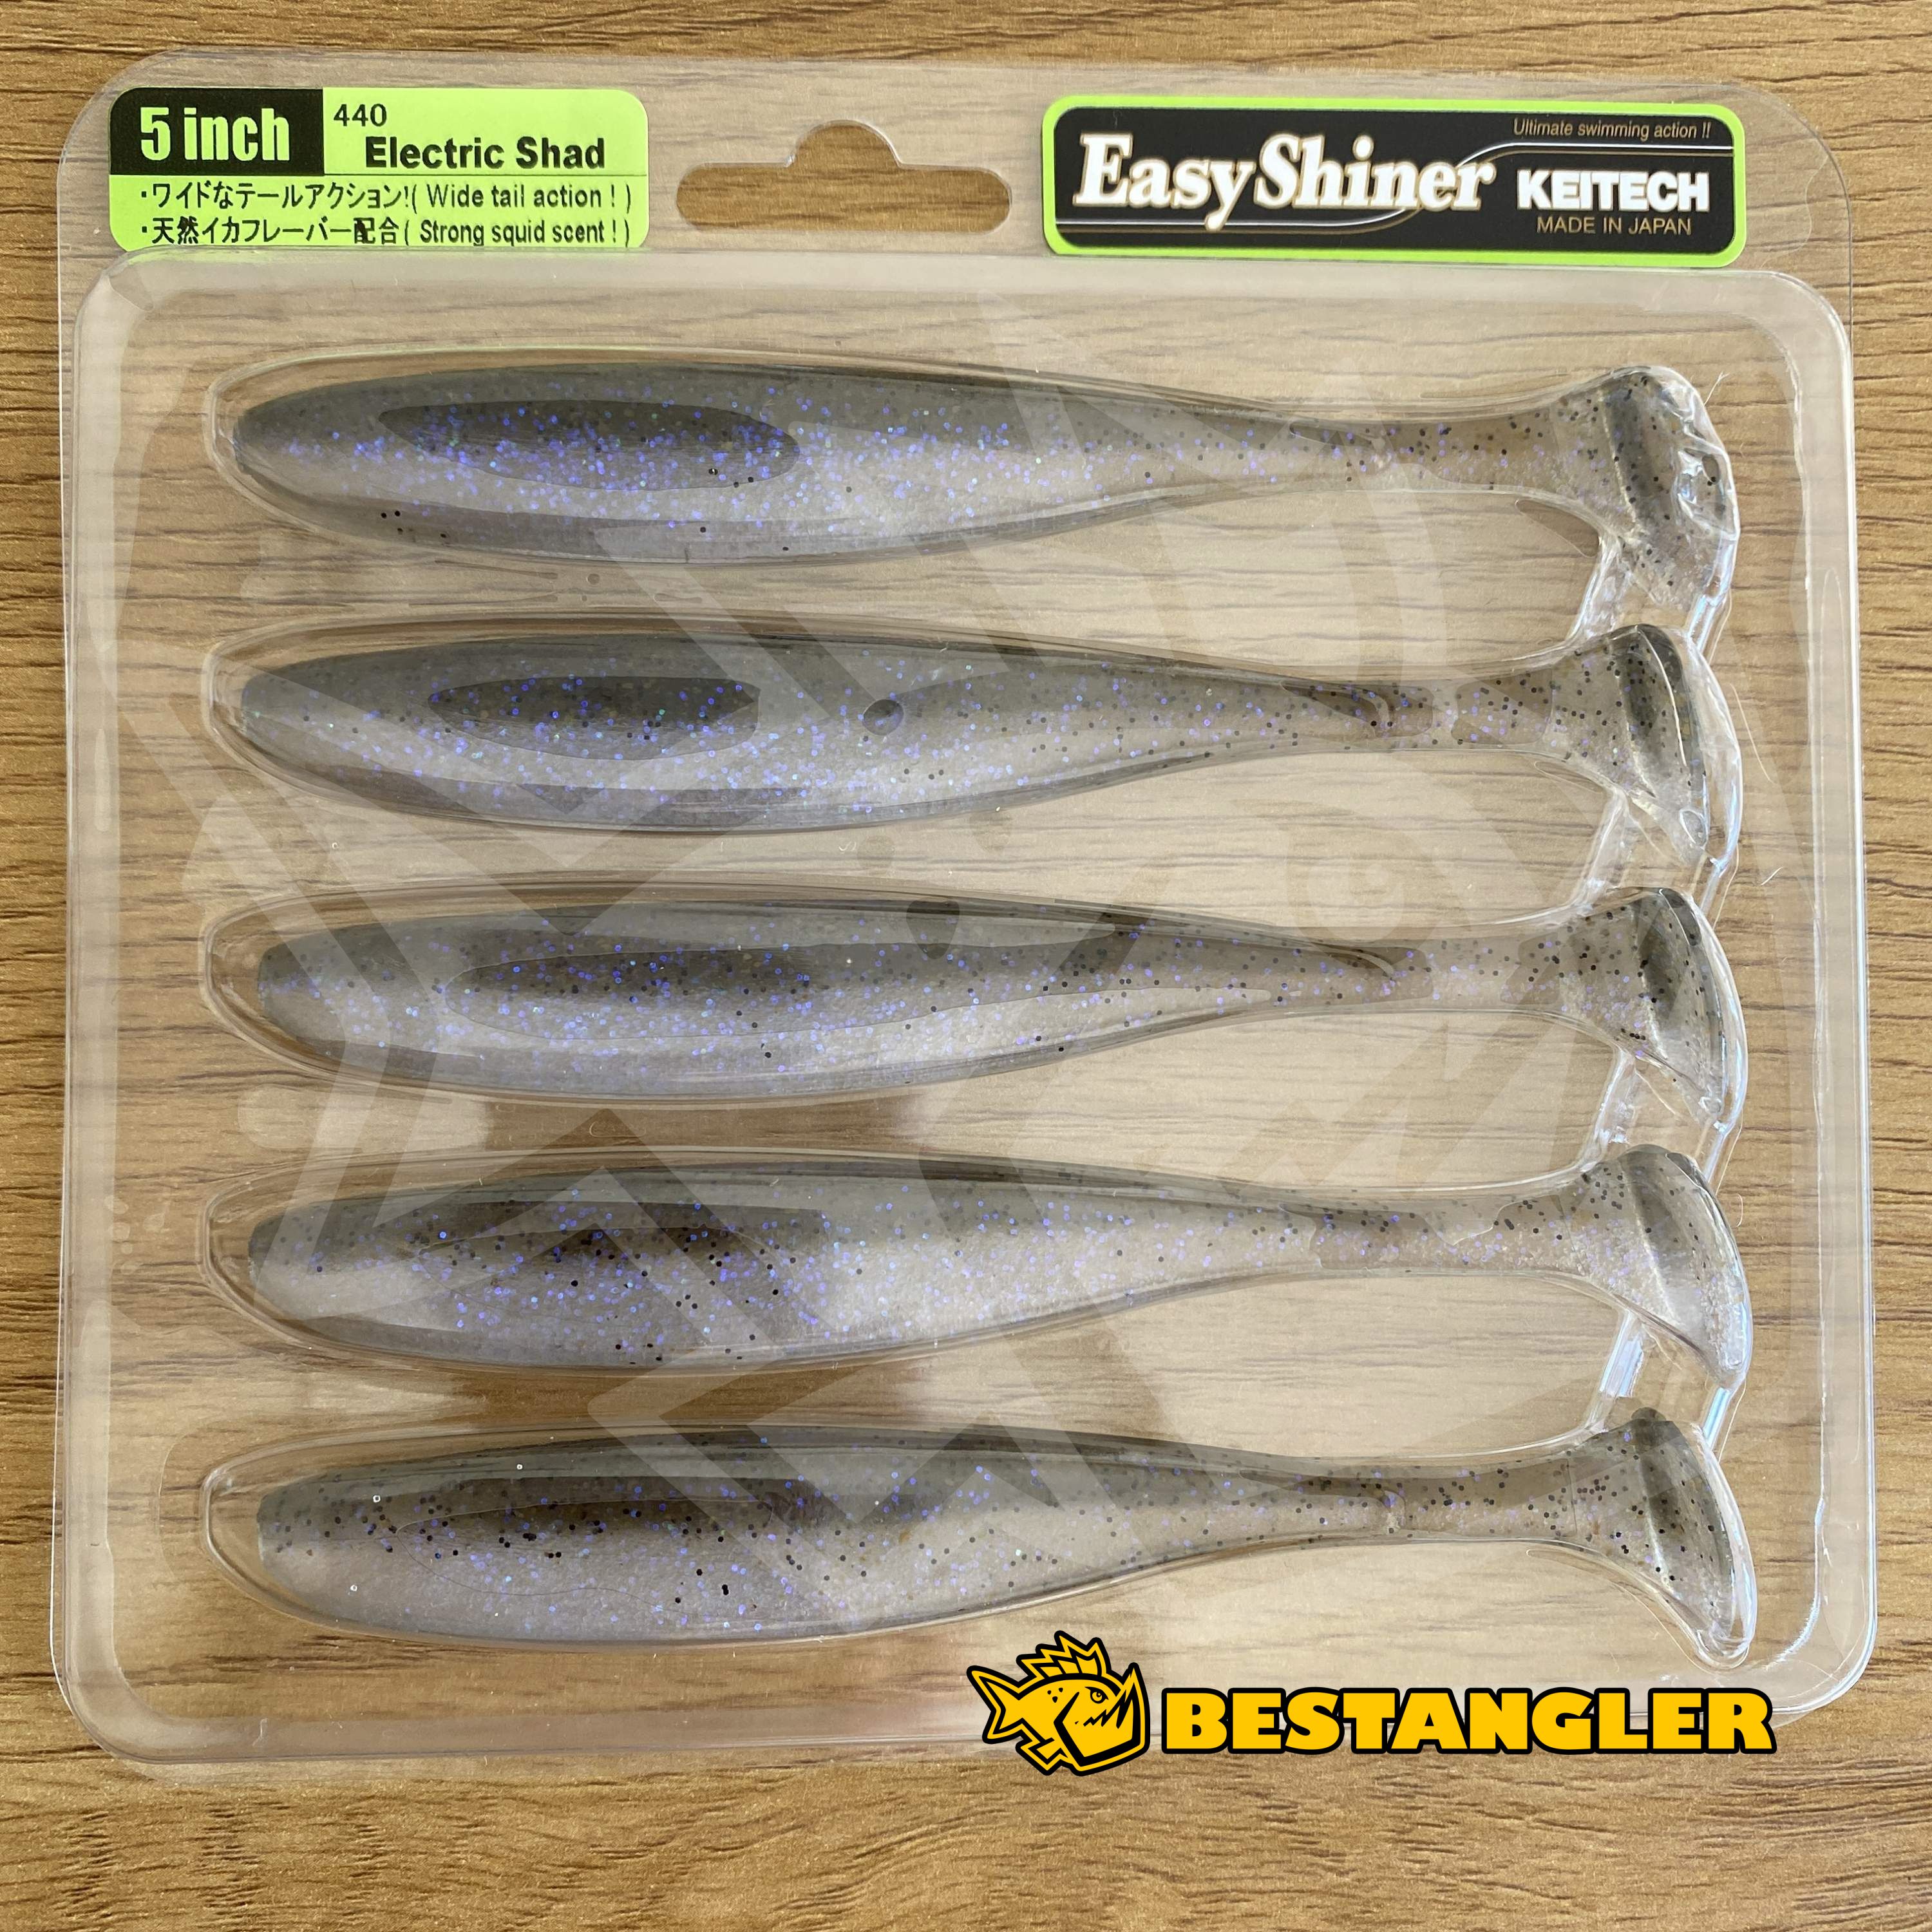 Keitech Easy Shiner 5 Electric Shad